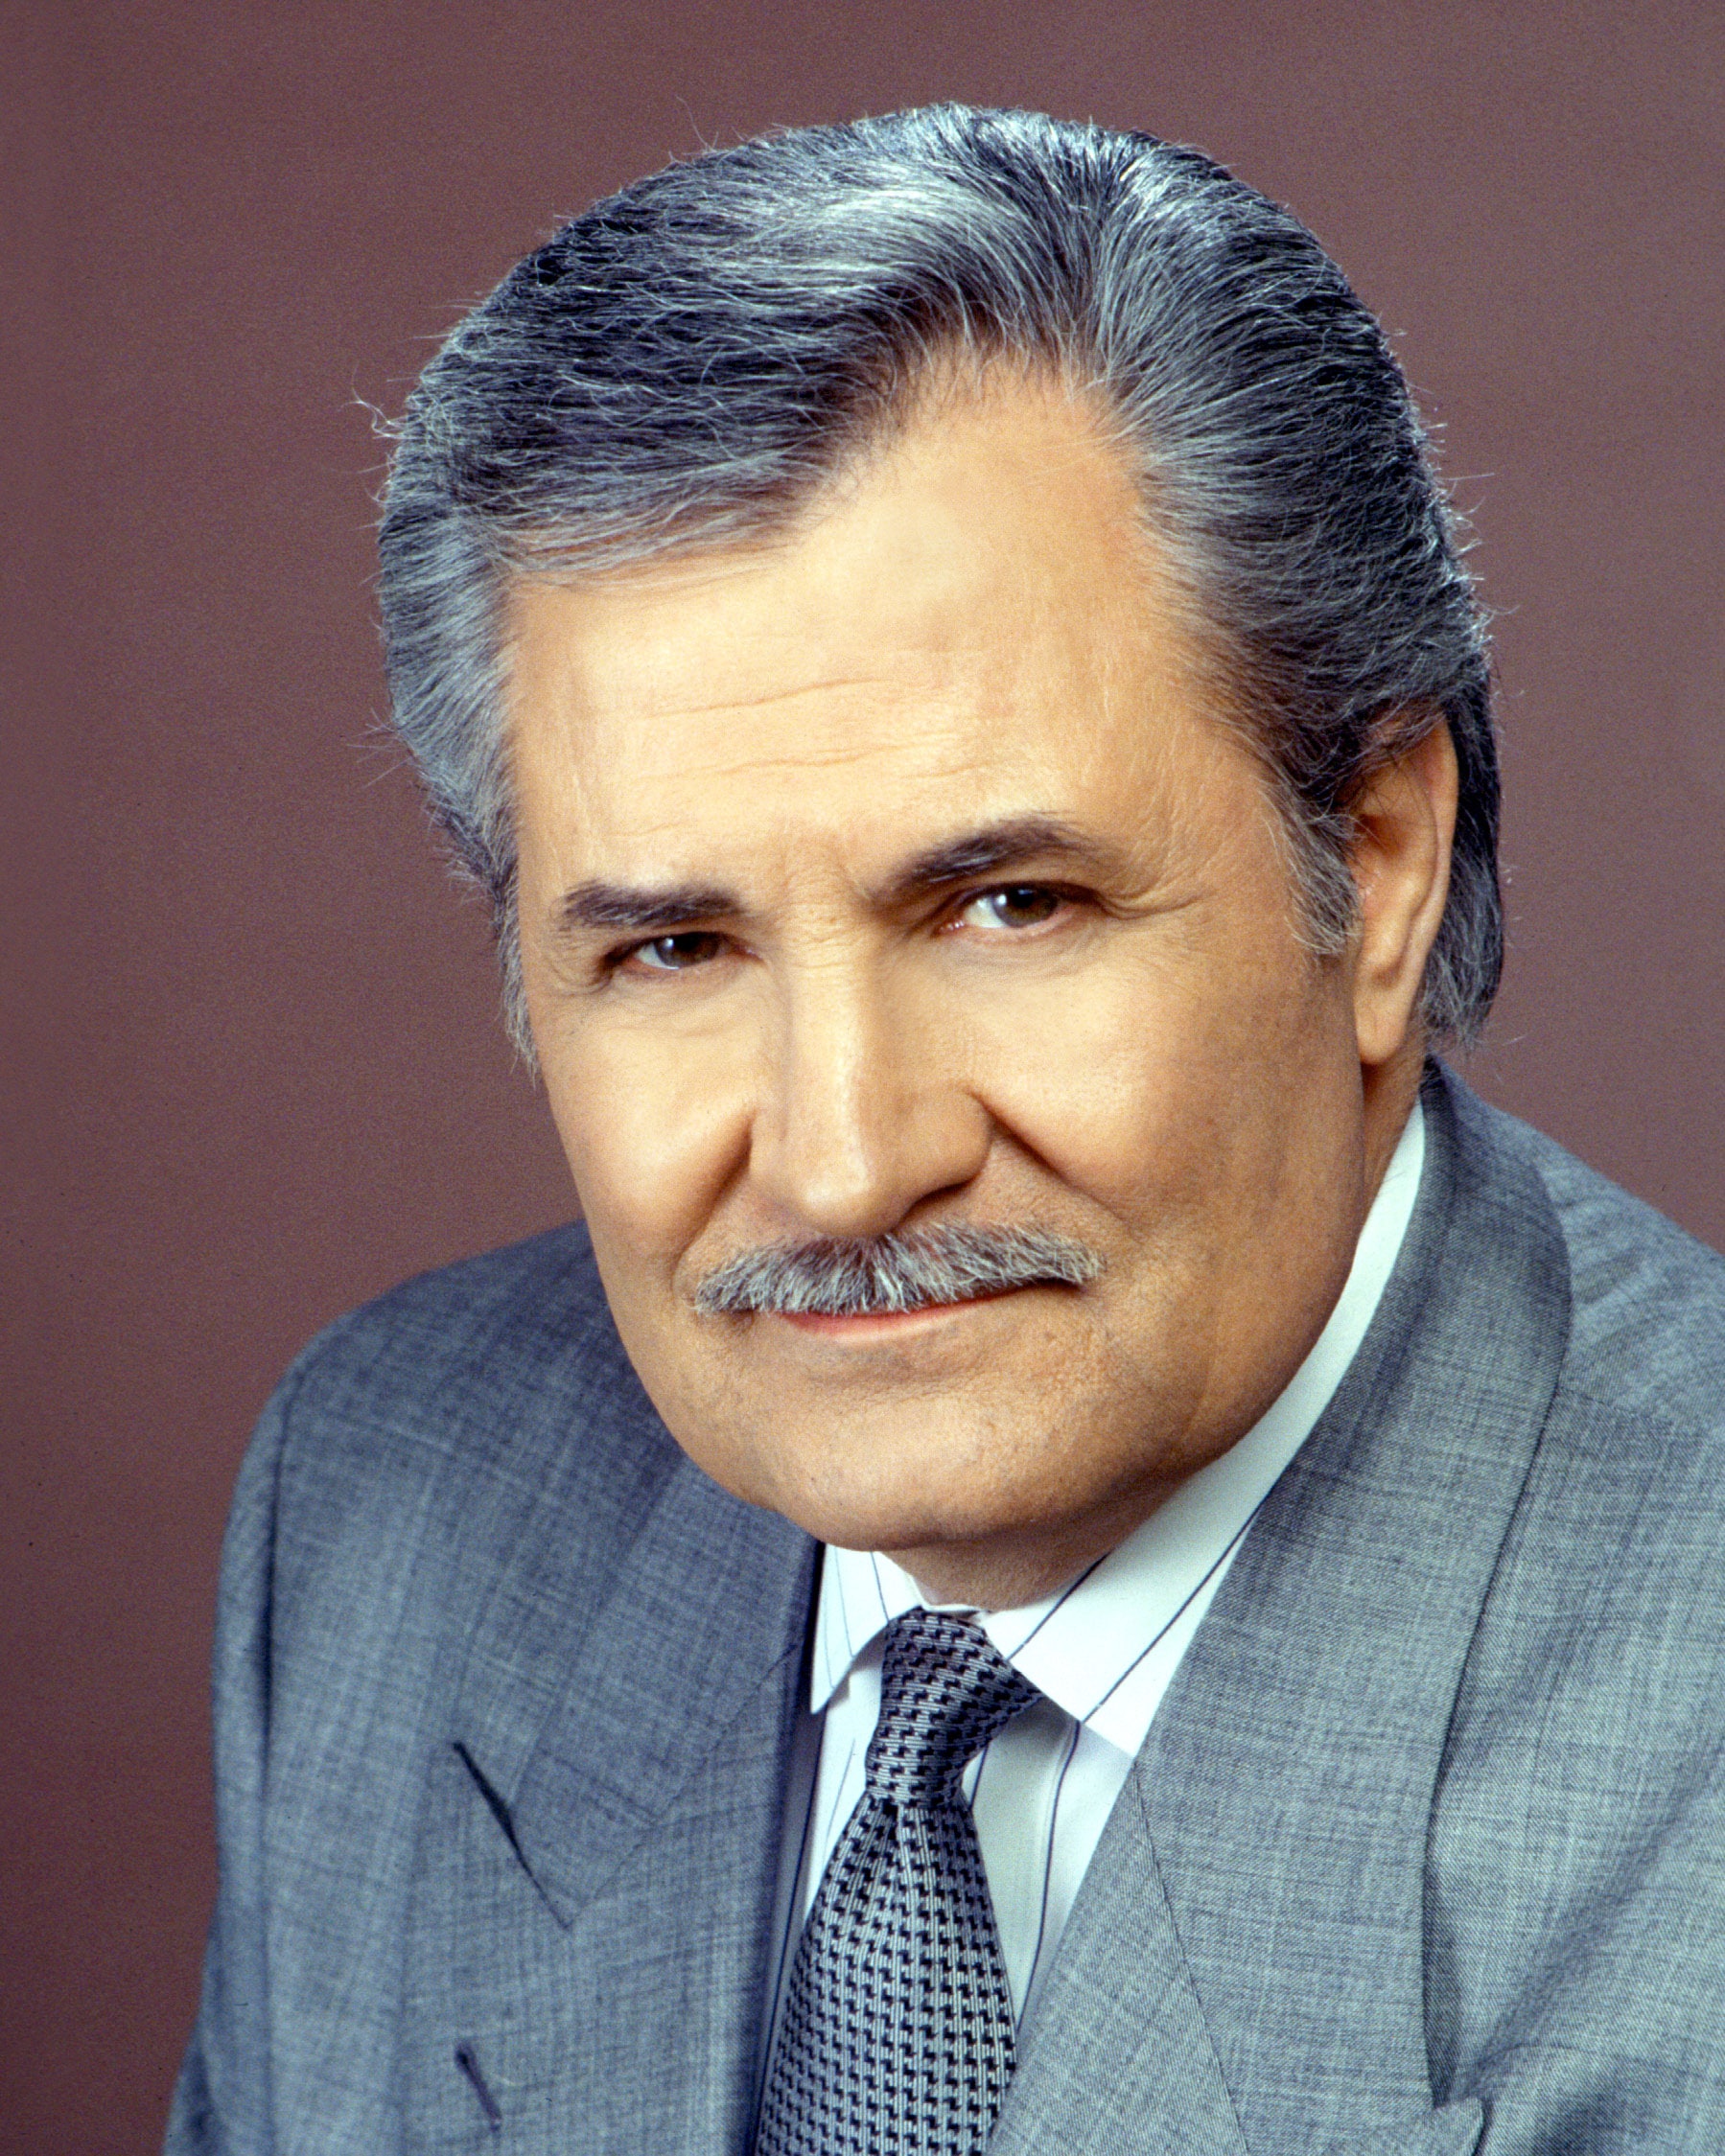 DAYS OF OUR LIVES, John Aniston